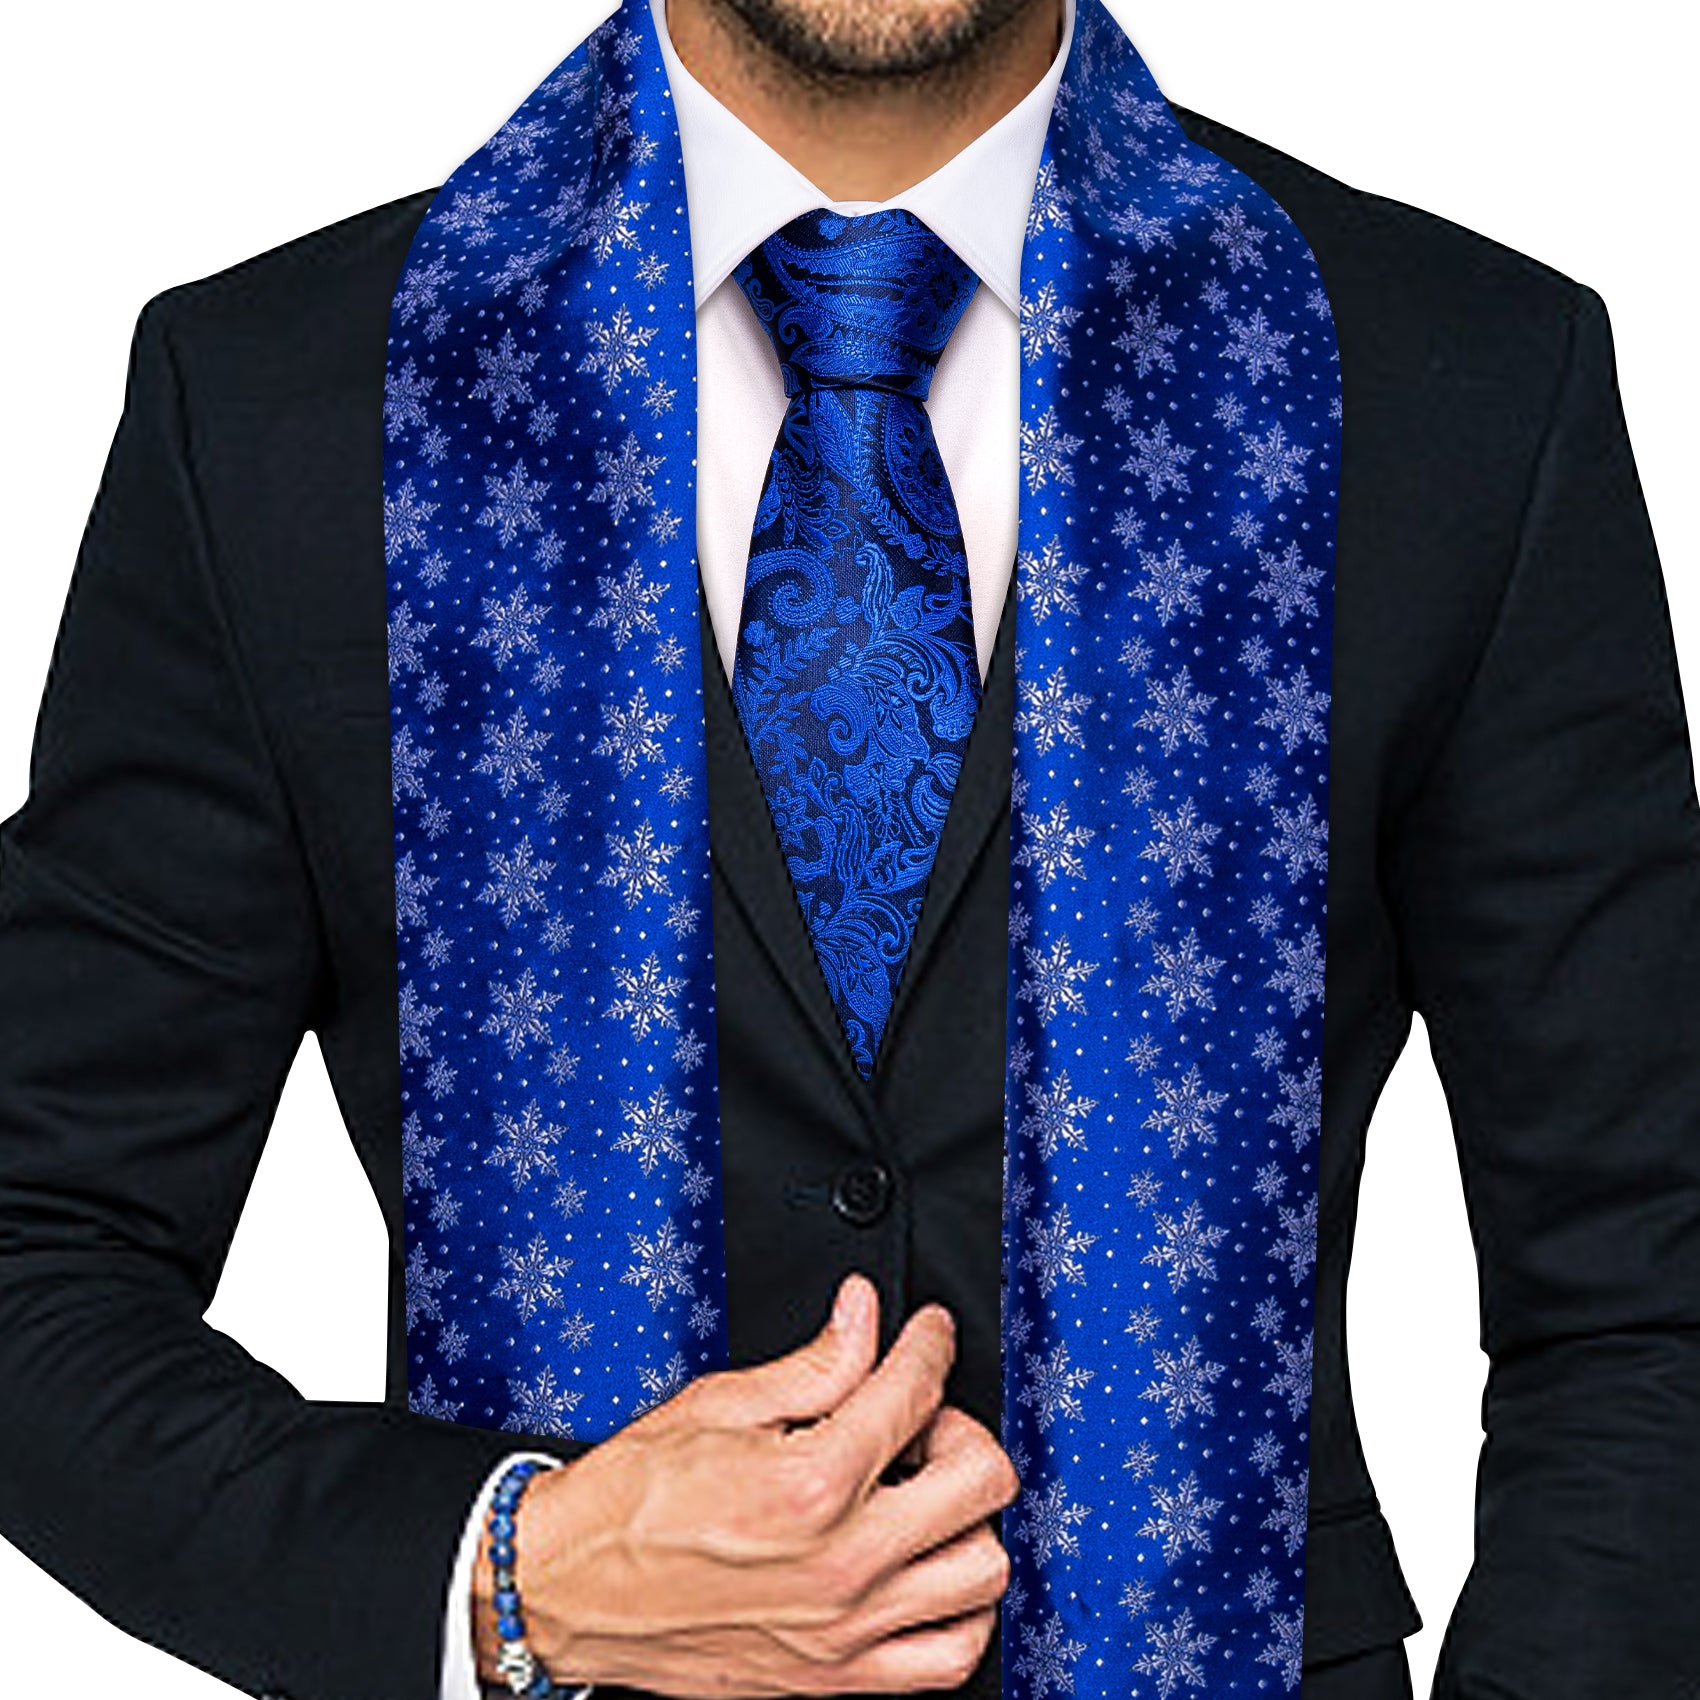 Luxury Christmas Blue Snowflake Floral Scarf with Tie Set